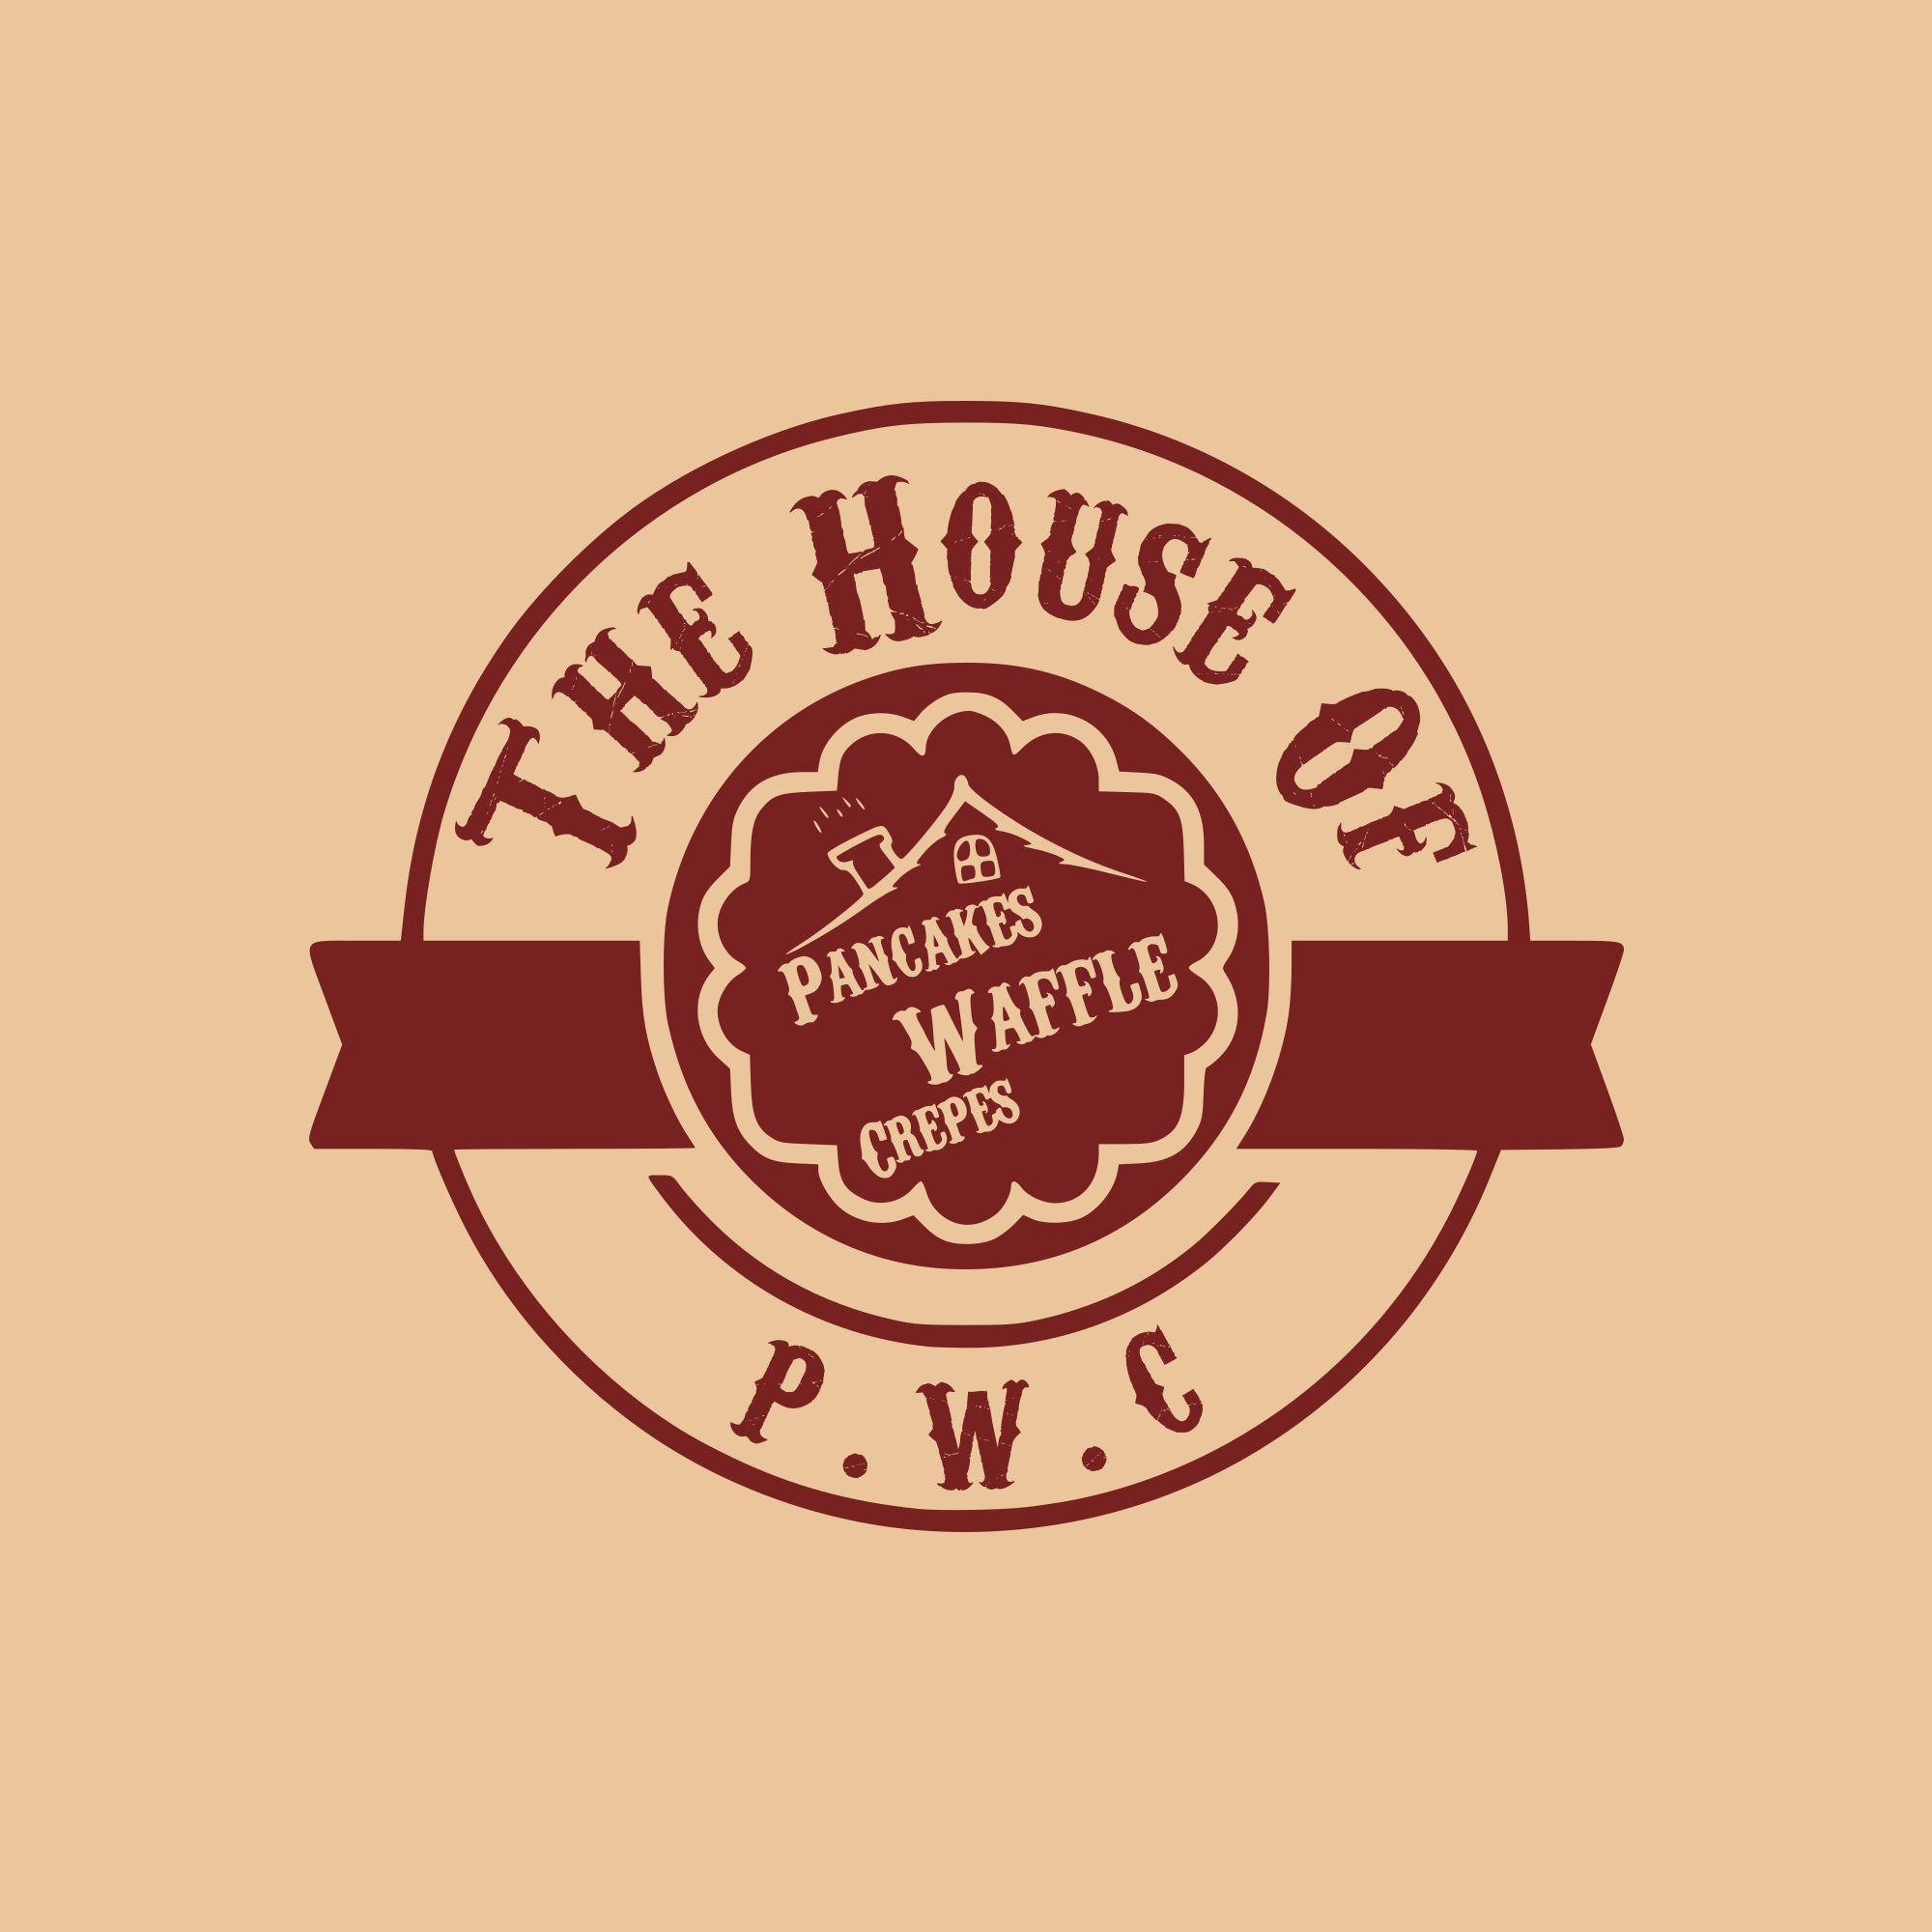 The House of PWC